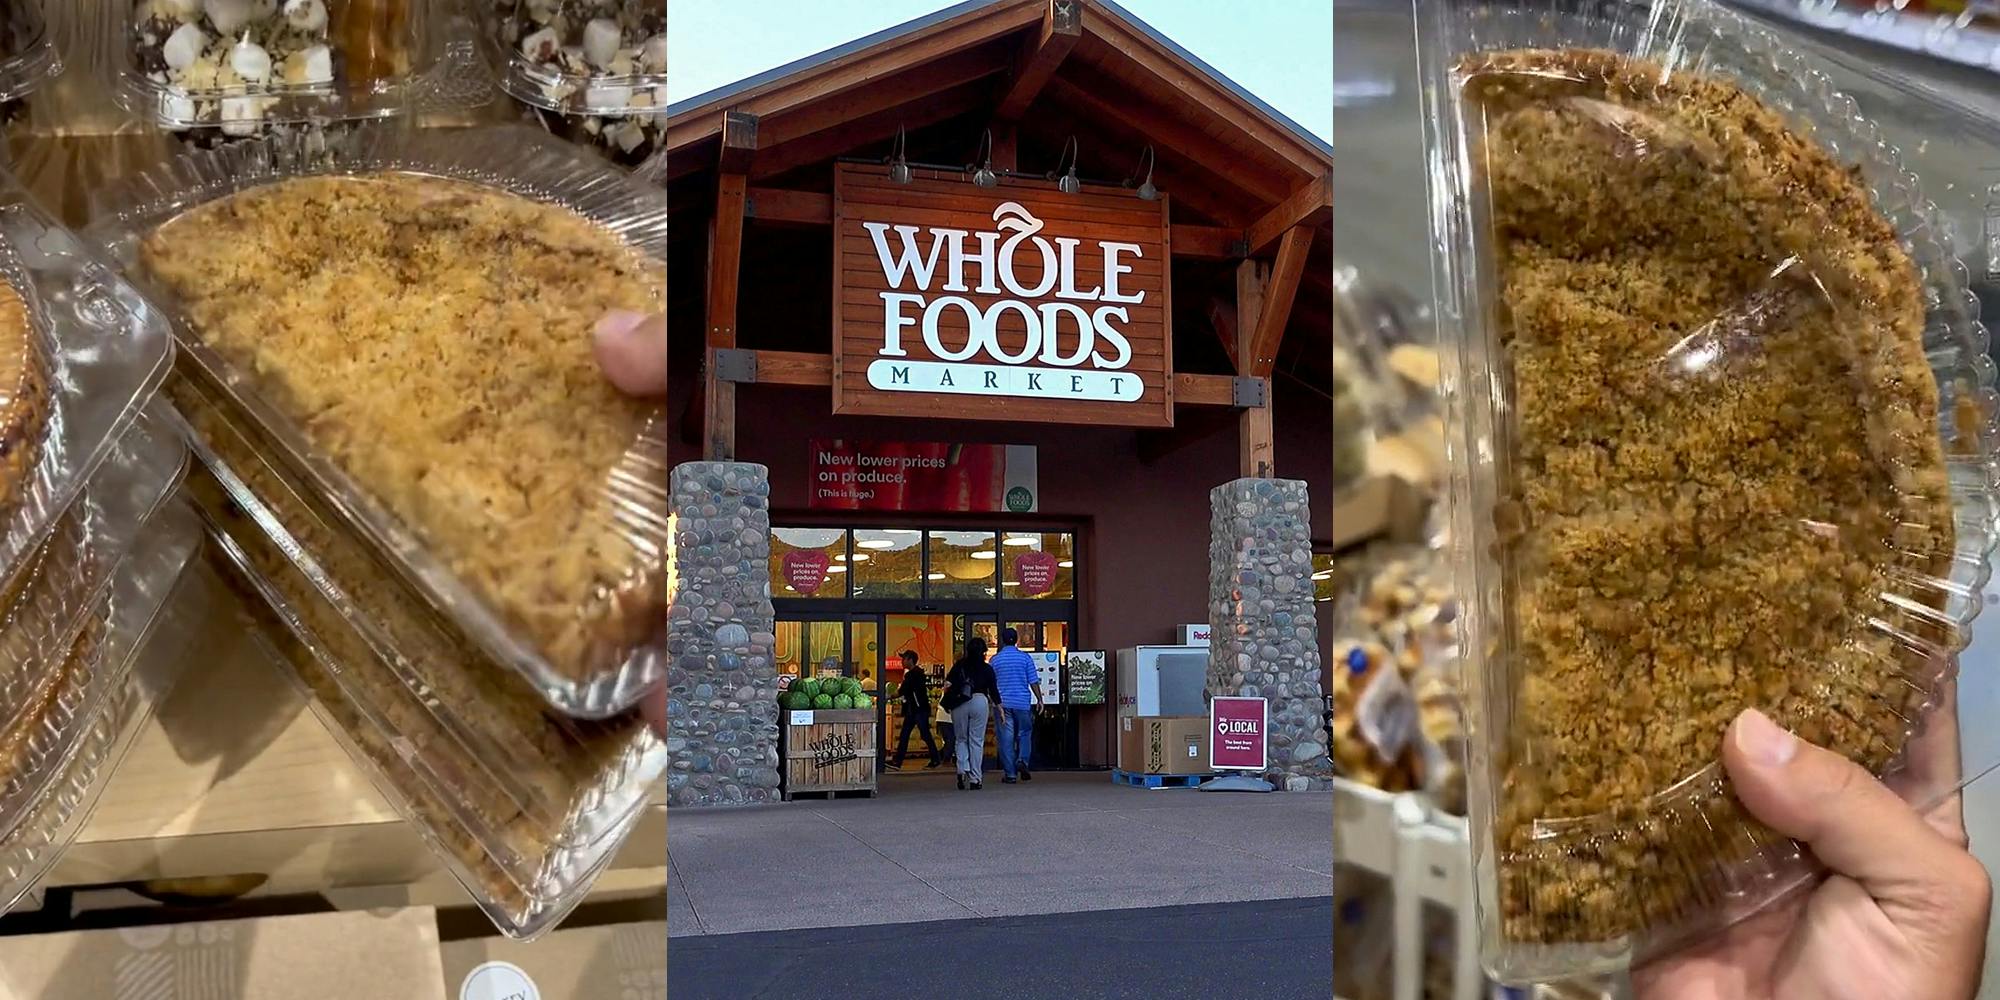 person grabbing half pie serving of apple pie in clear container (l) Whole Foods Market building with sign (c) person holding up half pie serving of apple pie in clear container (r)